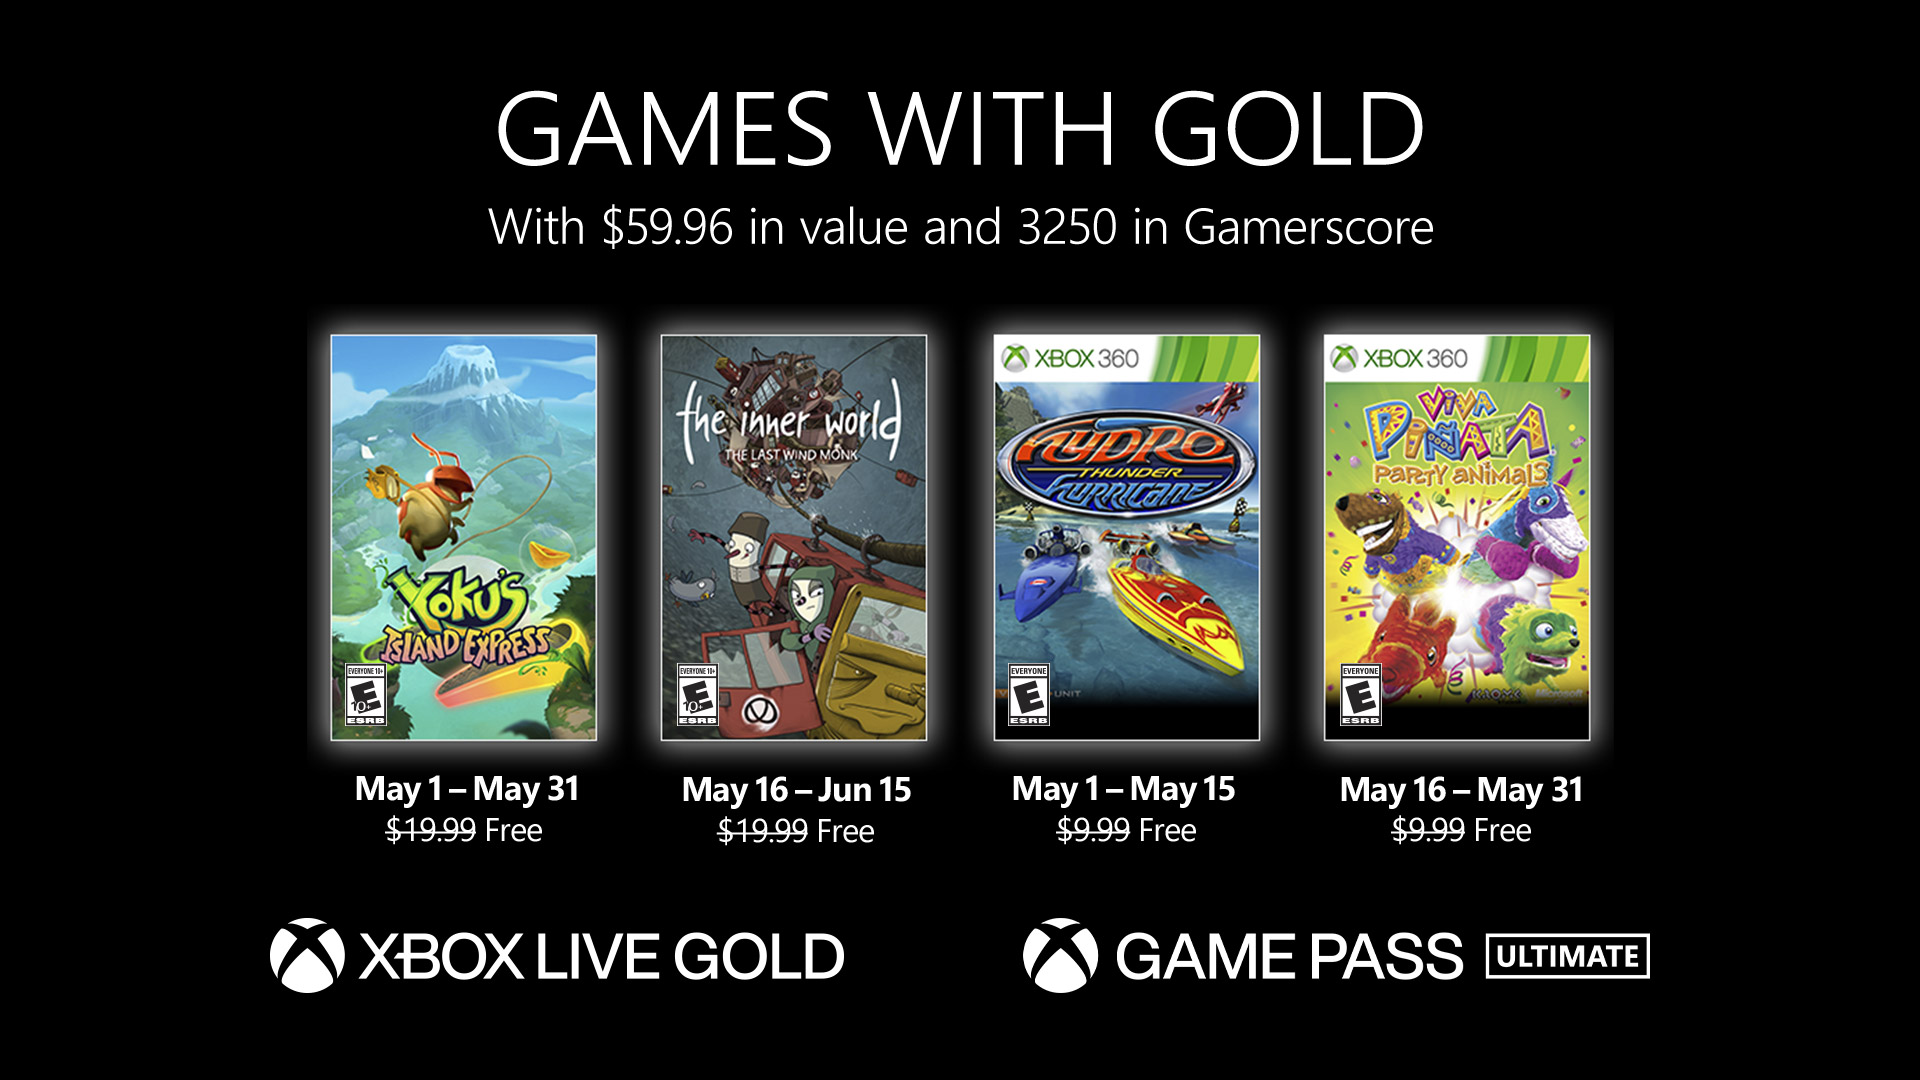 Games With Gold May 1ed202ee4c9c2f5cd722